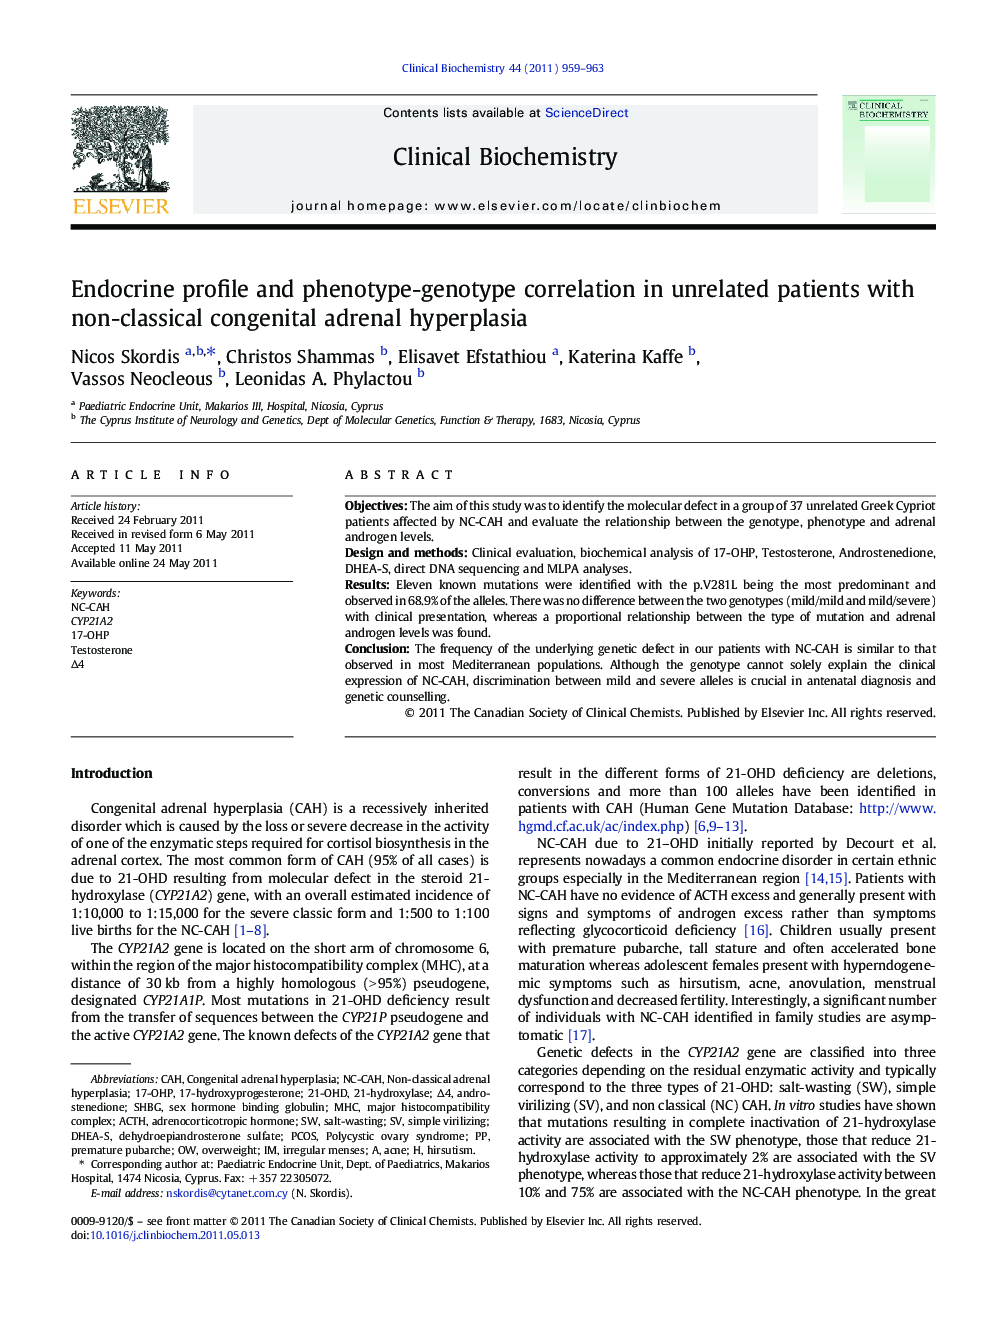 Endocrine profile and phenotype-genotype correlation in unrelated patients with non-classical congenital adrenal hyperplasia